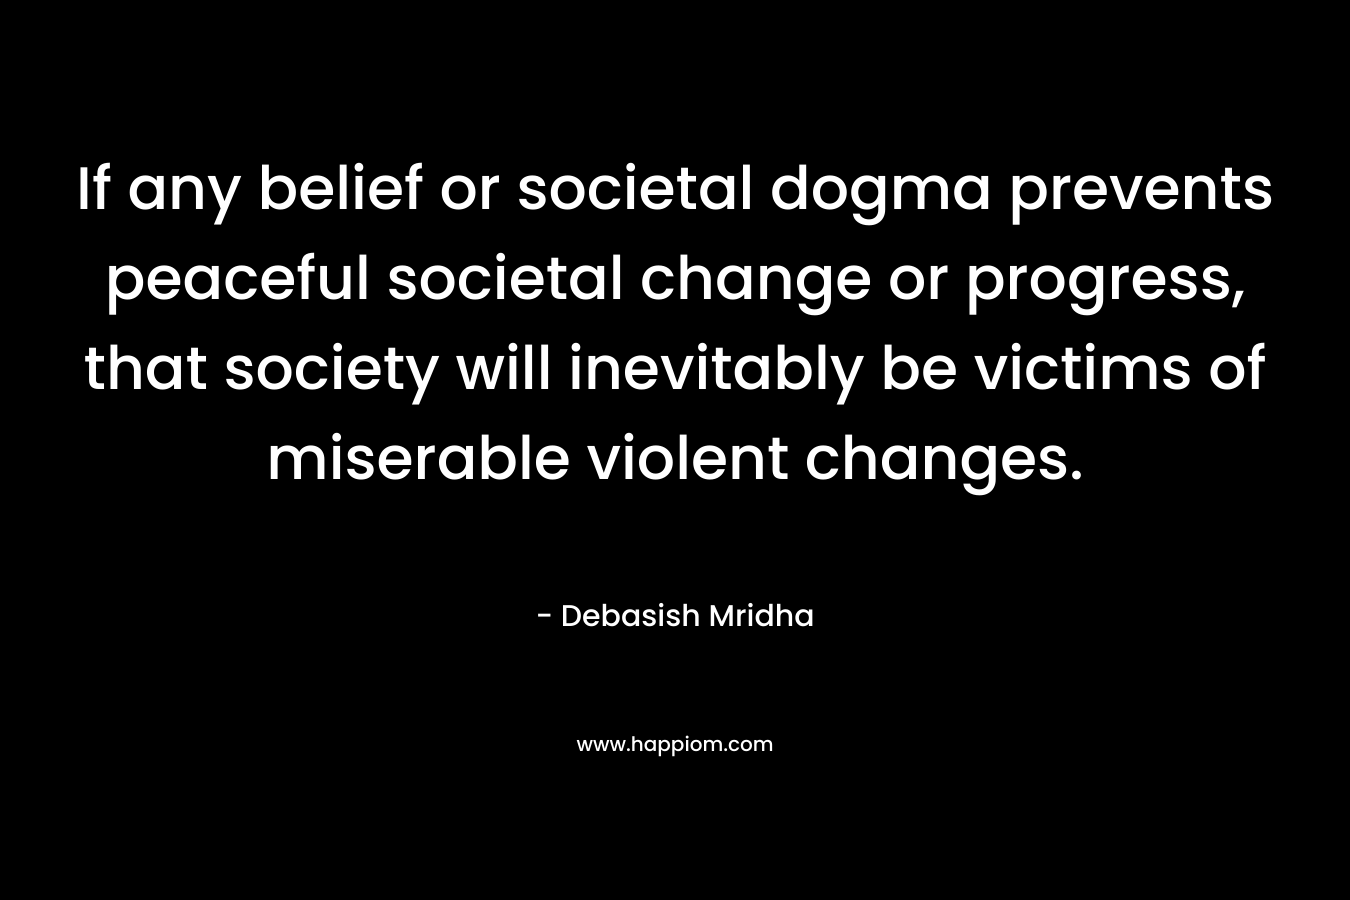 If any belief or societal dogma prevents peaceful societal change or progress, that society will inevitably be victims of miserable violent changes. – Debasish Mridha